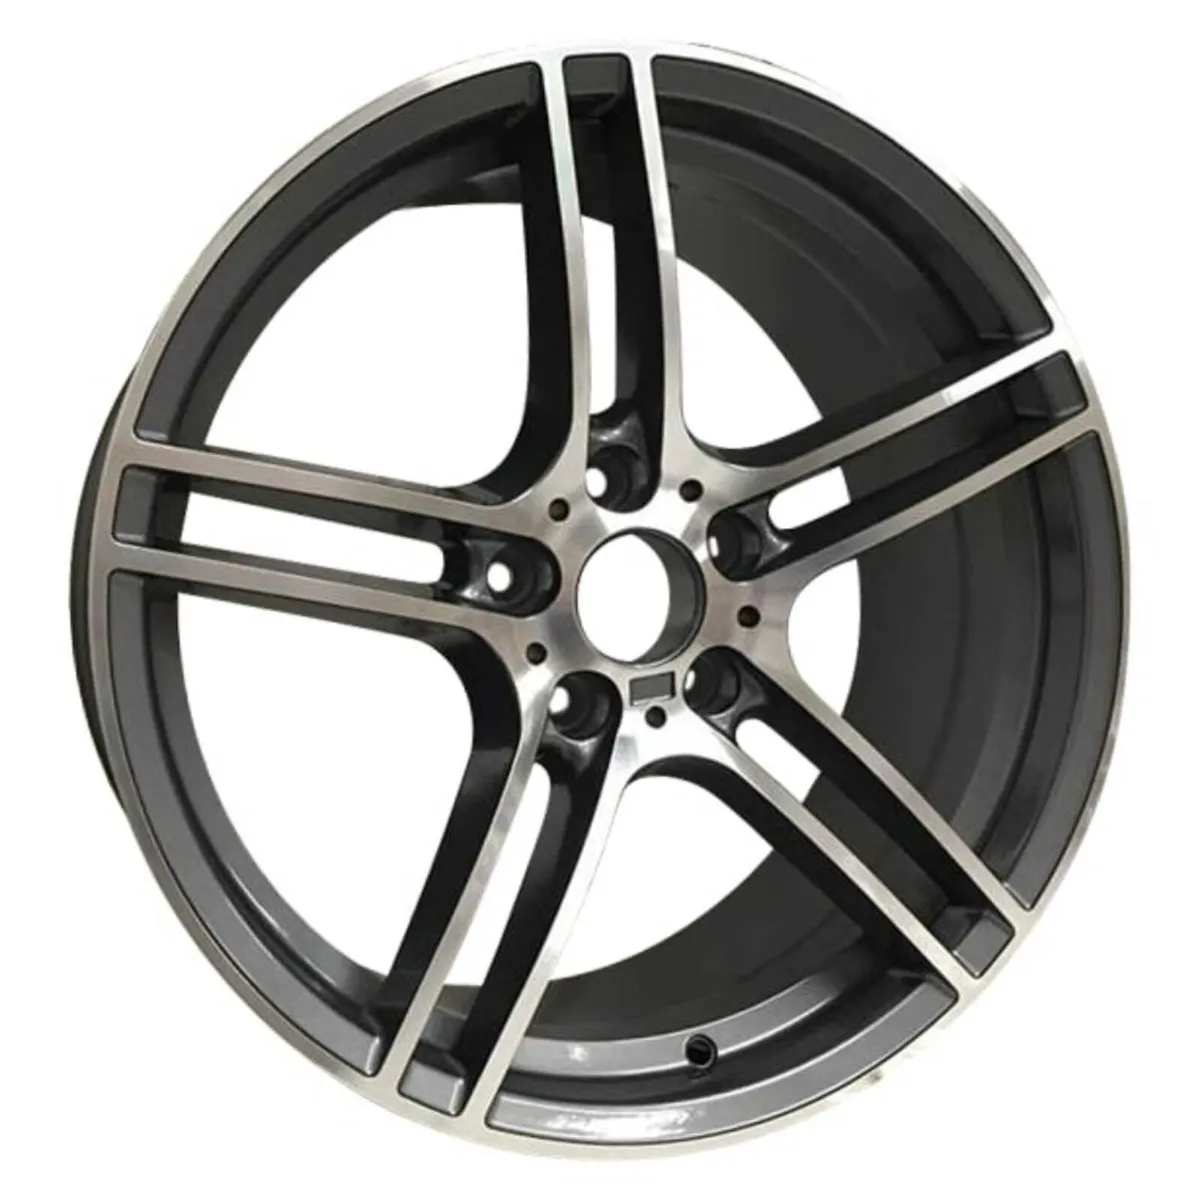 19" 313 Style Wheels Fits BMW 3 Series